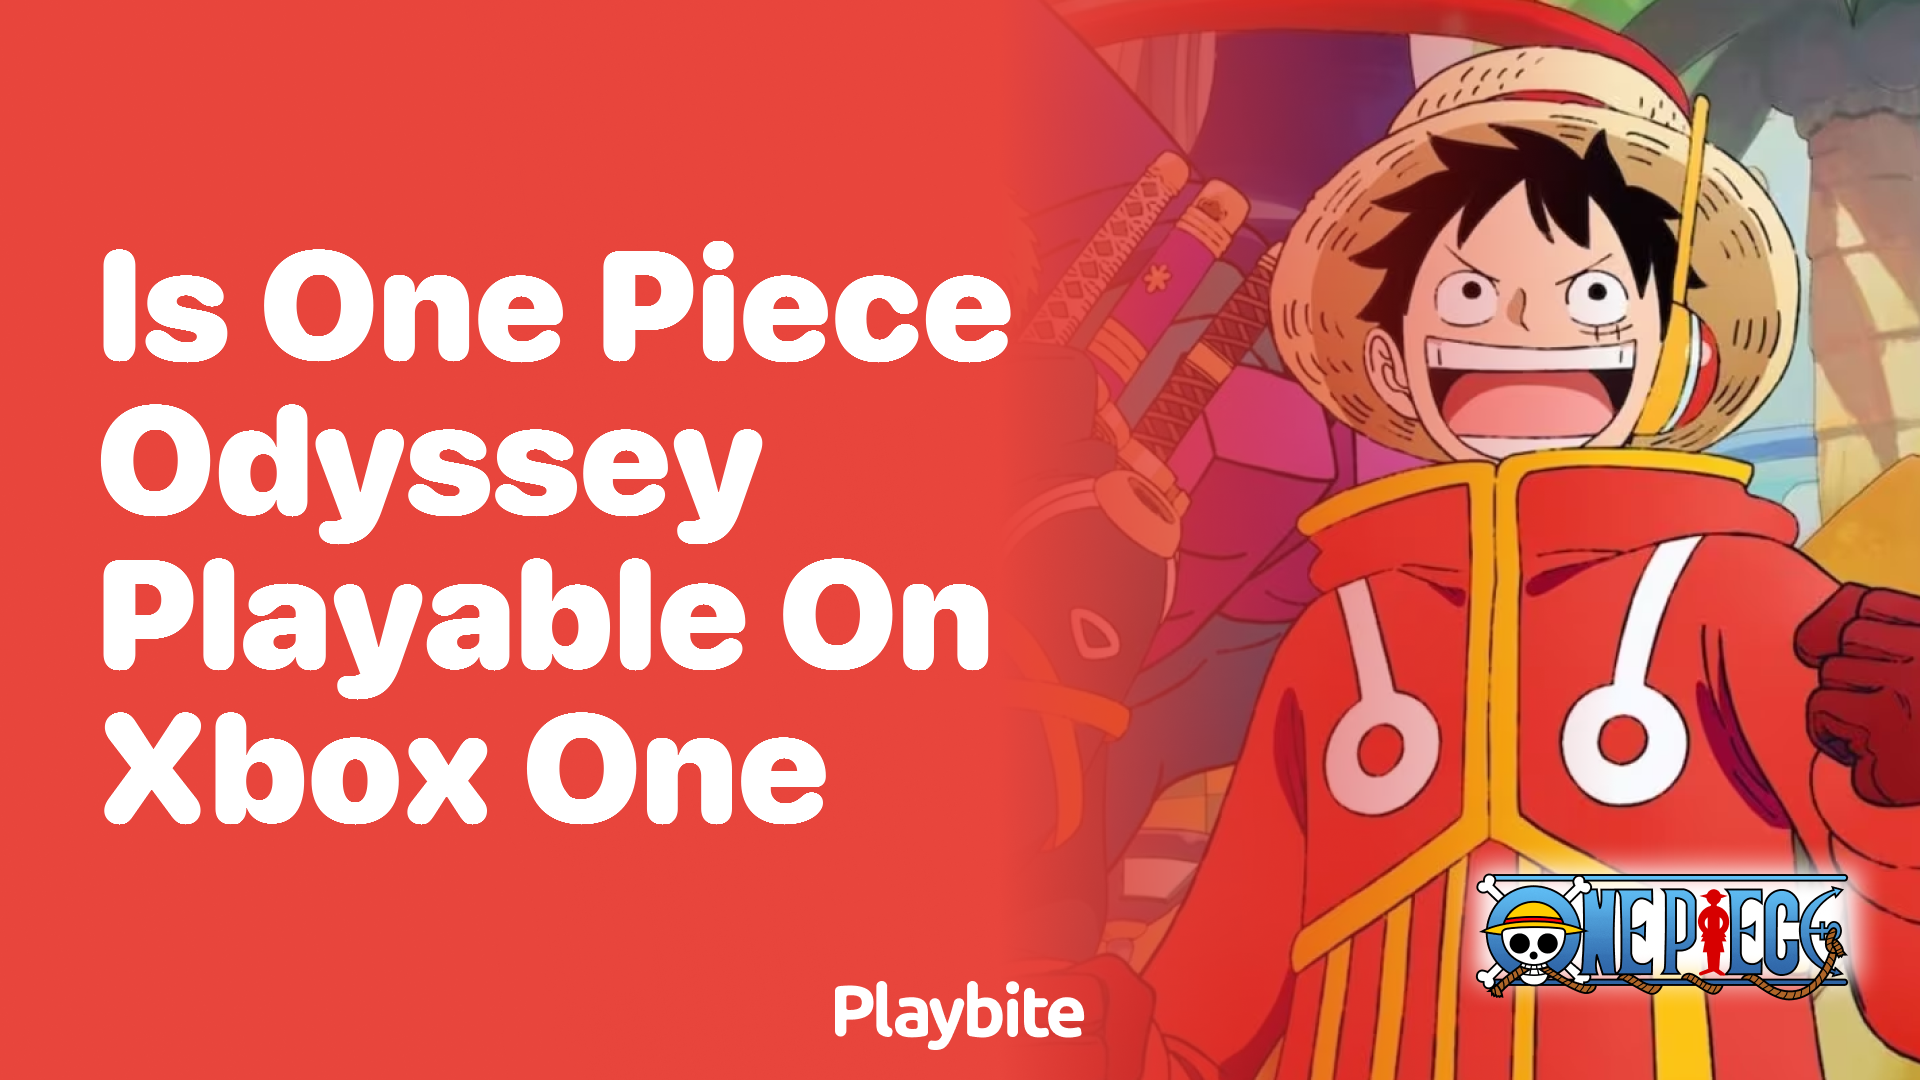 Is One Piece Odyssey Playable on Xbox One?